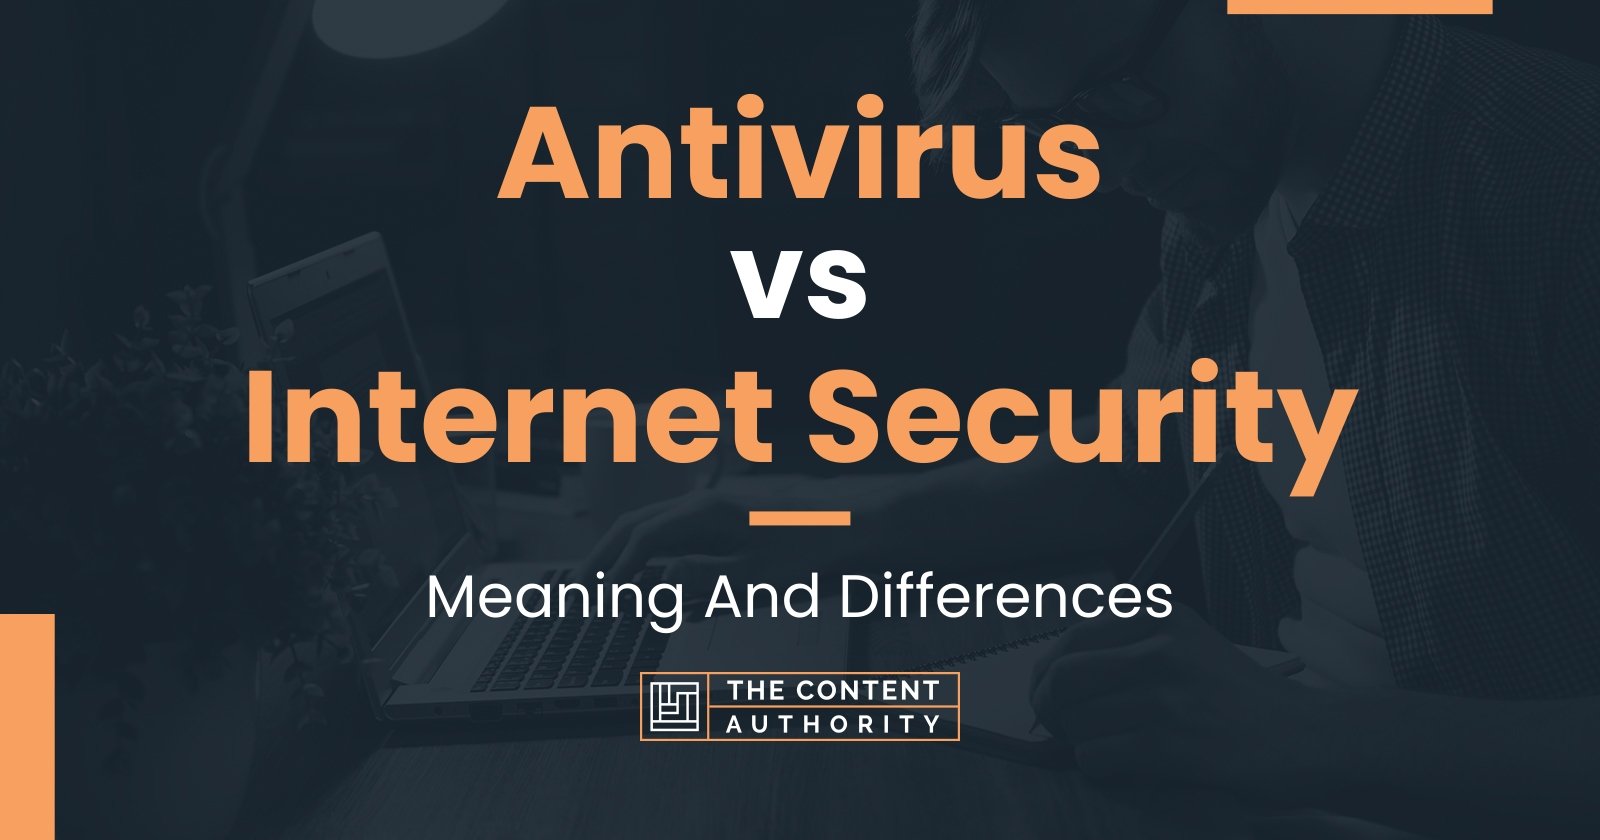 Antivirus vs Internet Security: Meaning And Differences